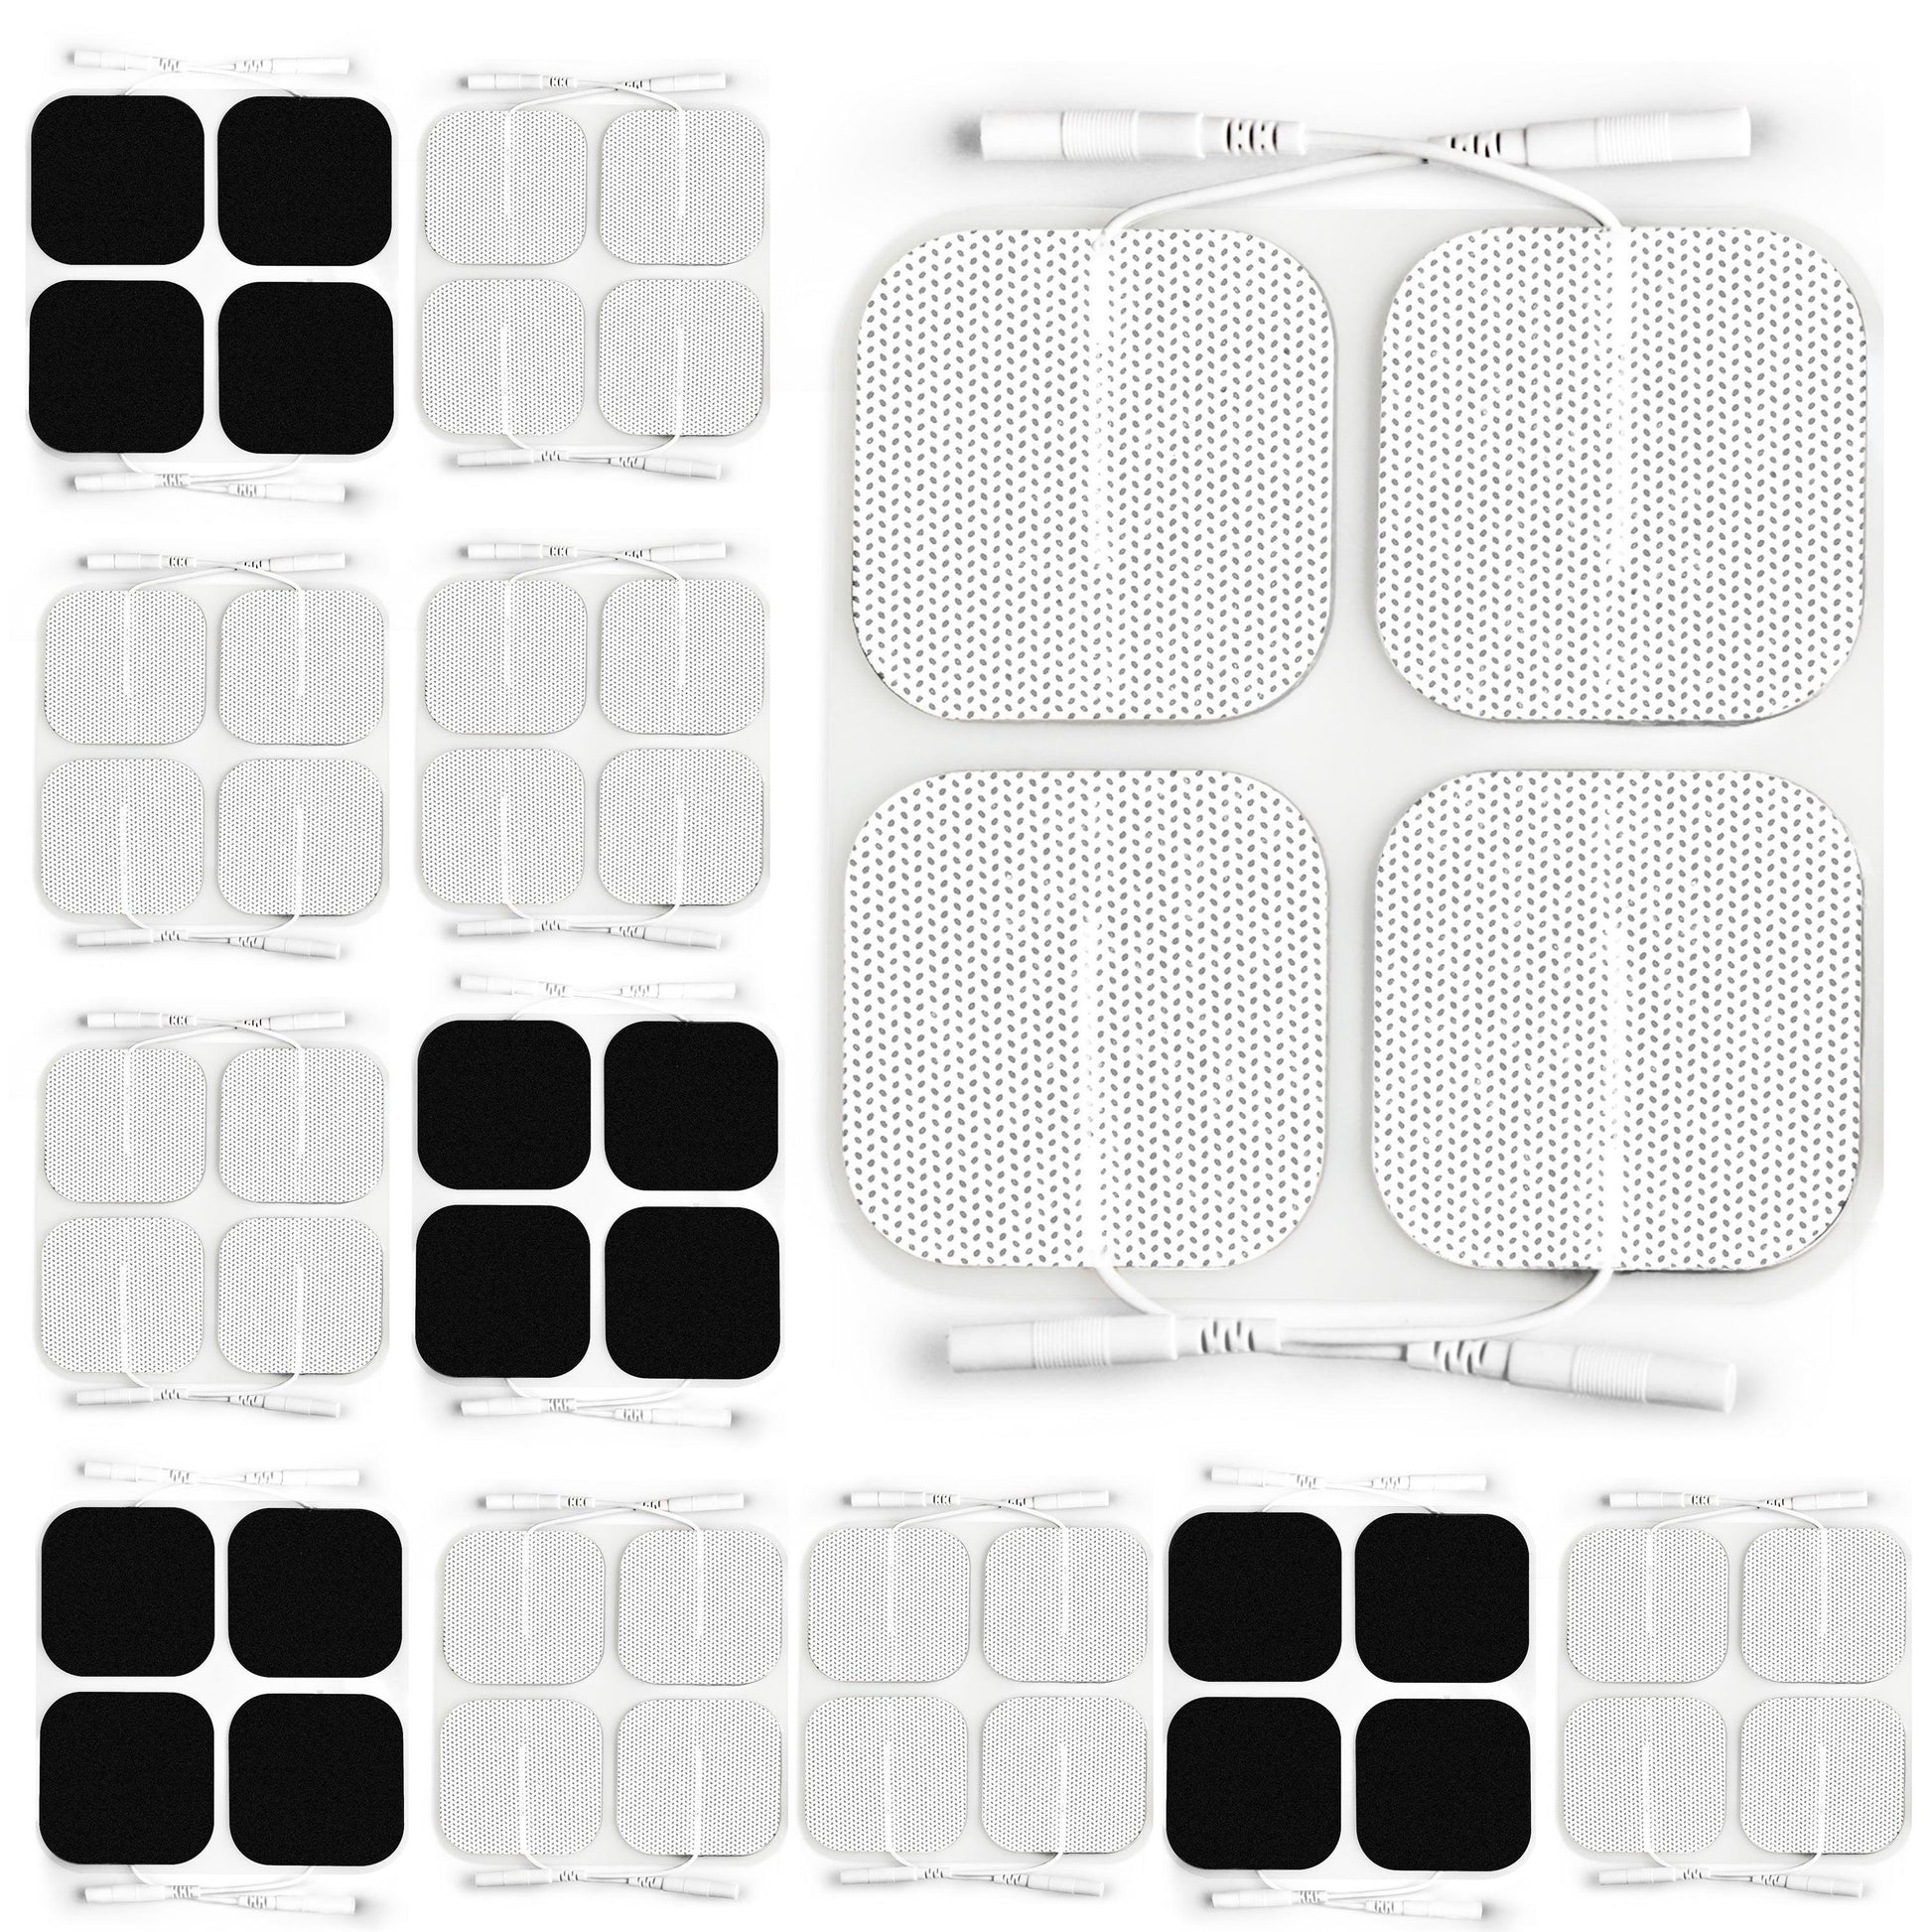 AUVON TENS Unit Replacement Pads, 4 x 8 Large Butterfly Shaped Electrode  Pads